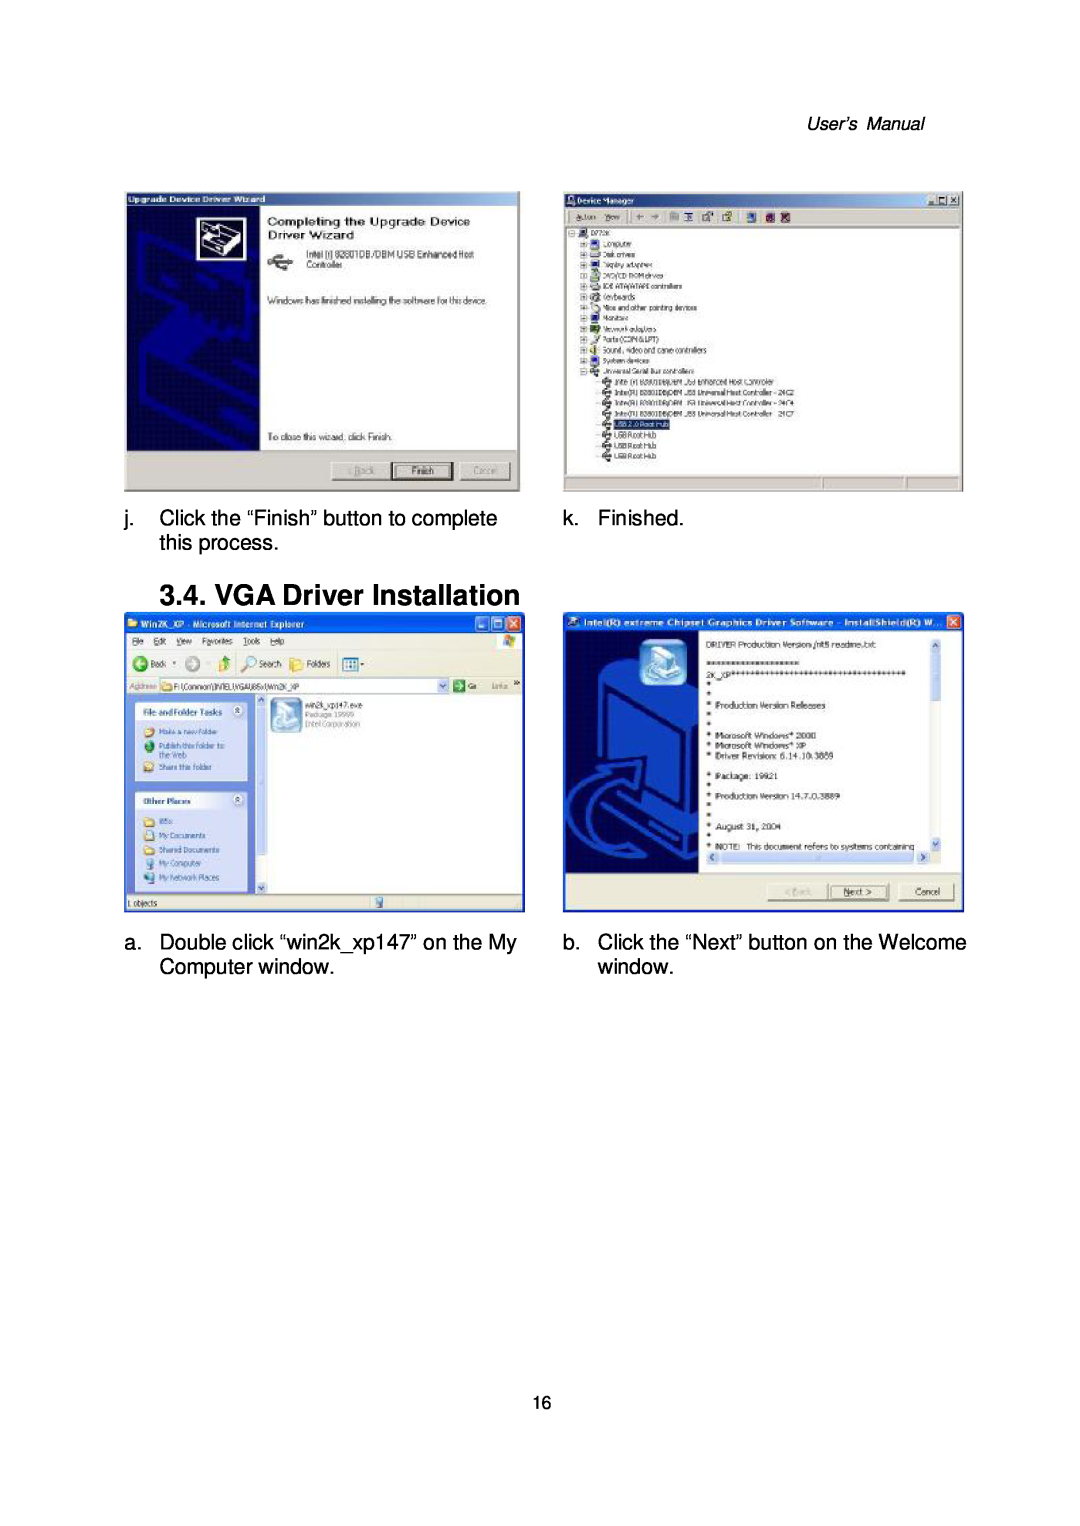 Intel 48201201 VGA Driver Installation, j. Click the “Finish” button to complete, k. Finished, this process, User’s Manual 